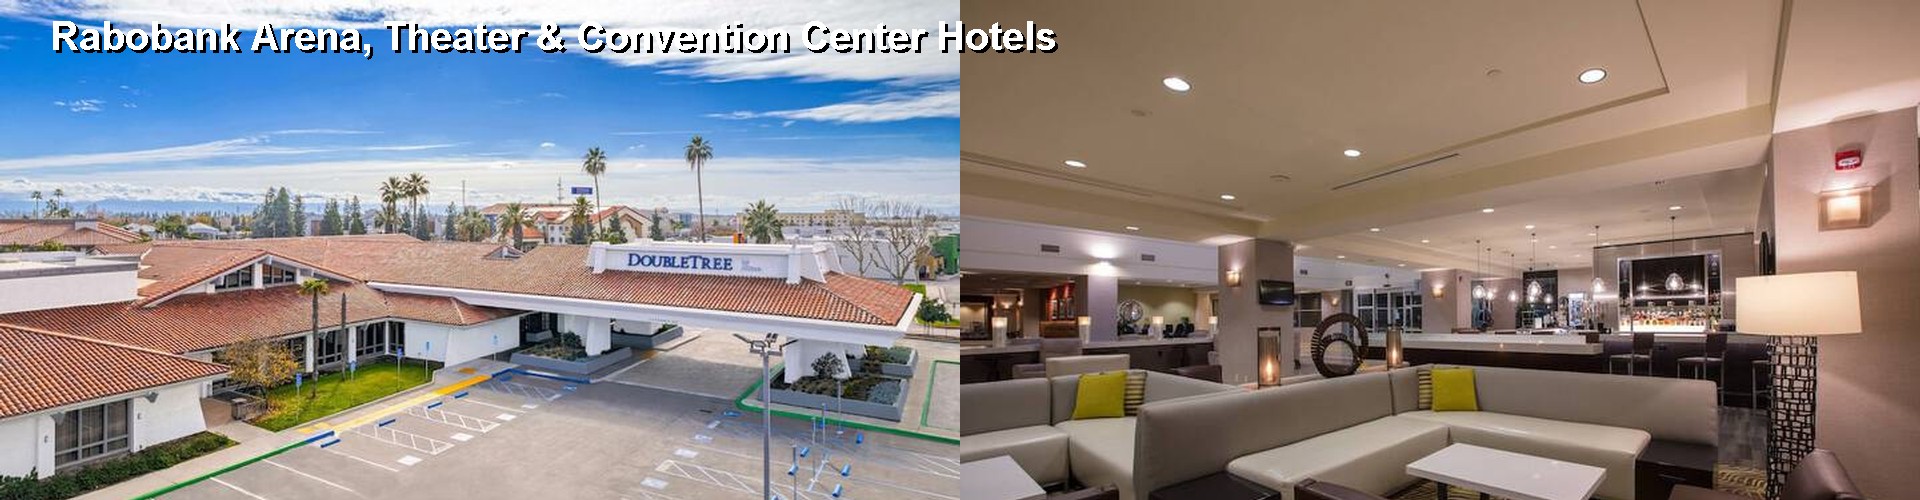 5 Best Hotels near Rabobank Arena, Theater & Convention Center